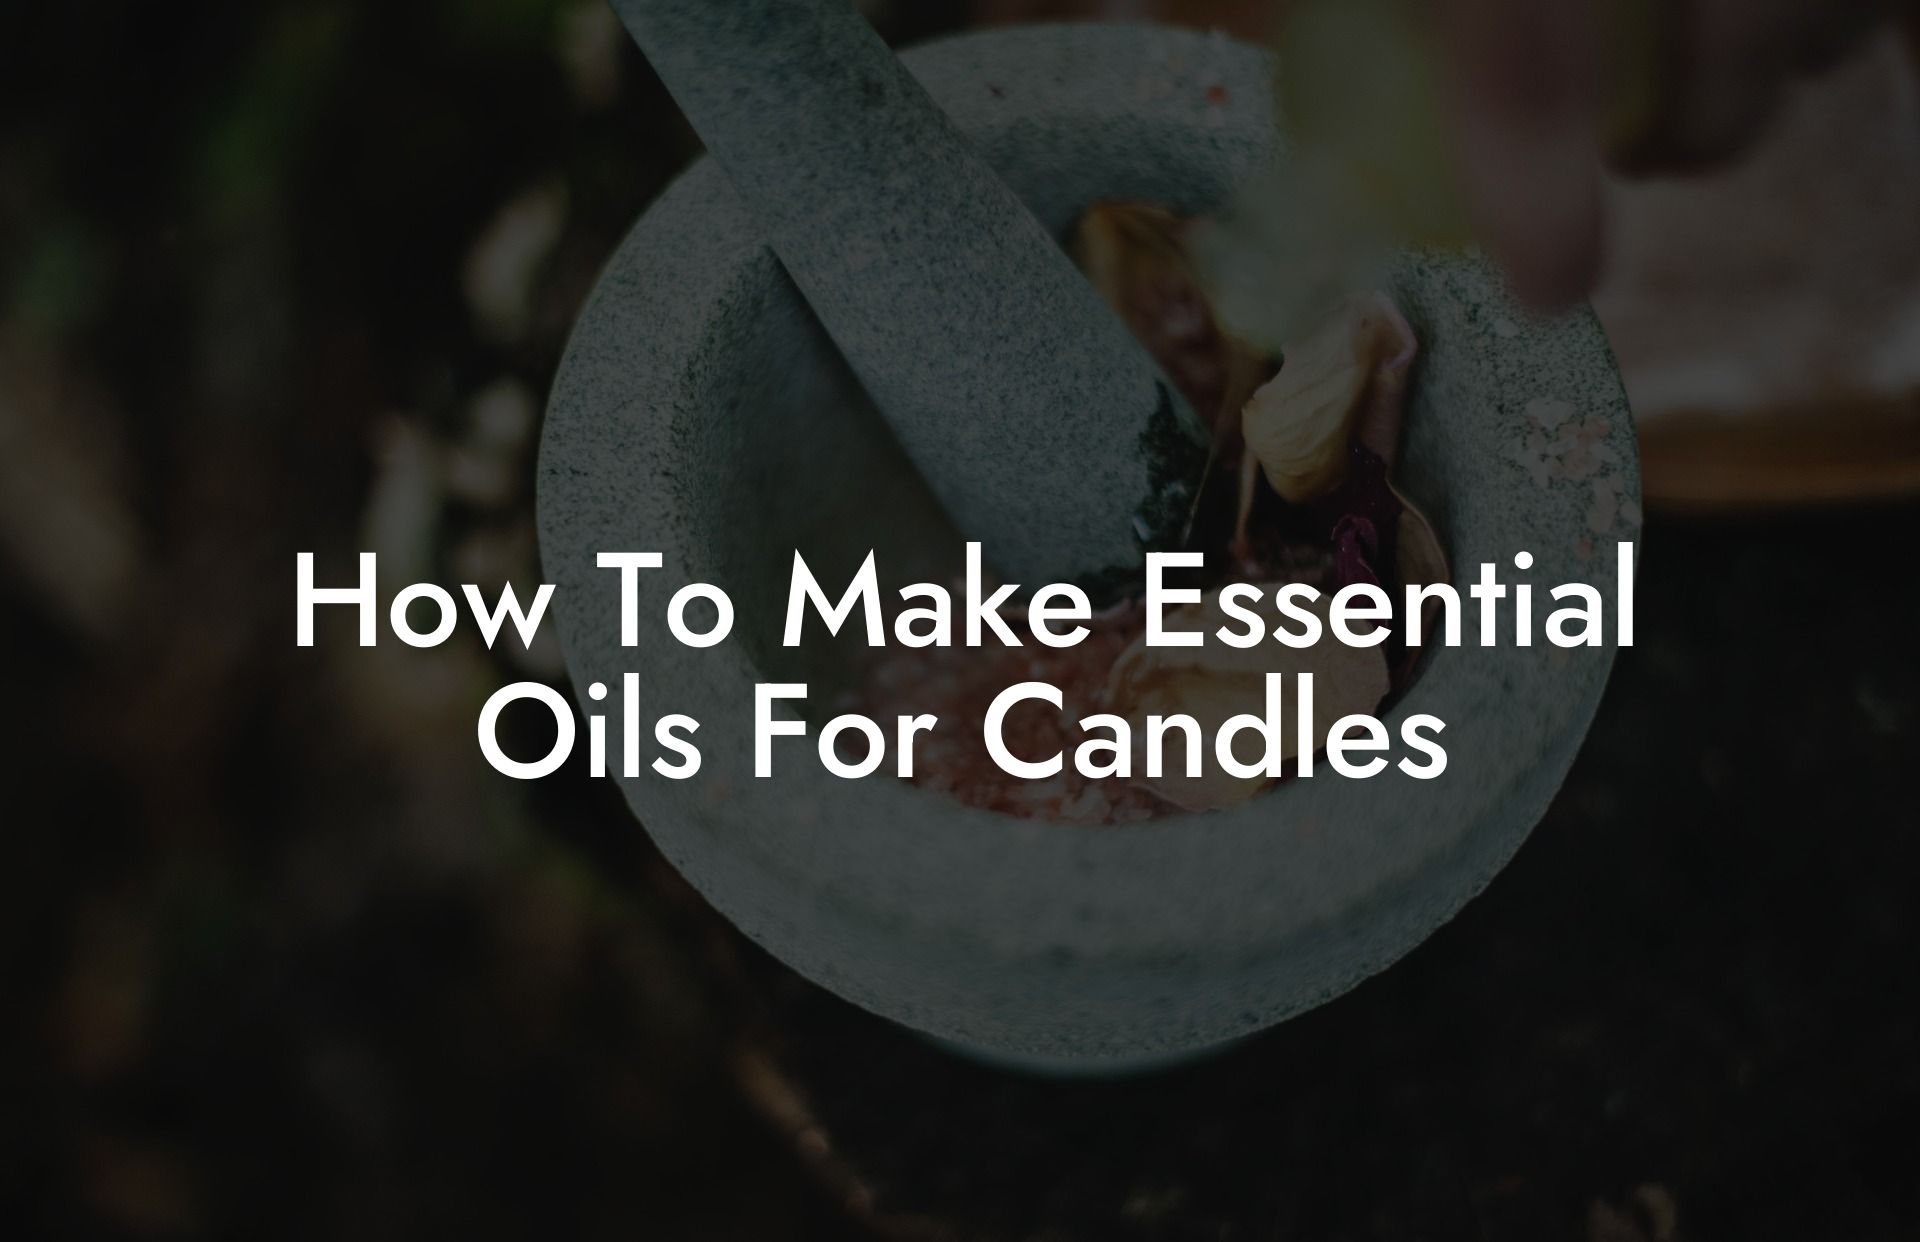 How To Make Essential Oils For Candles